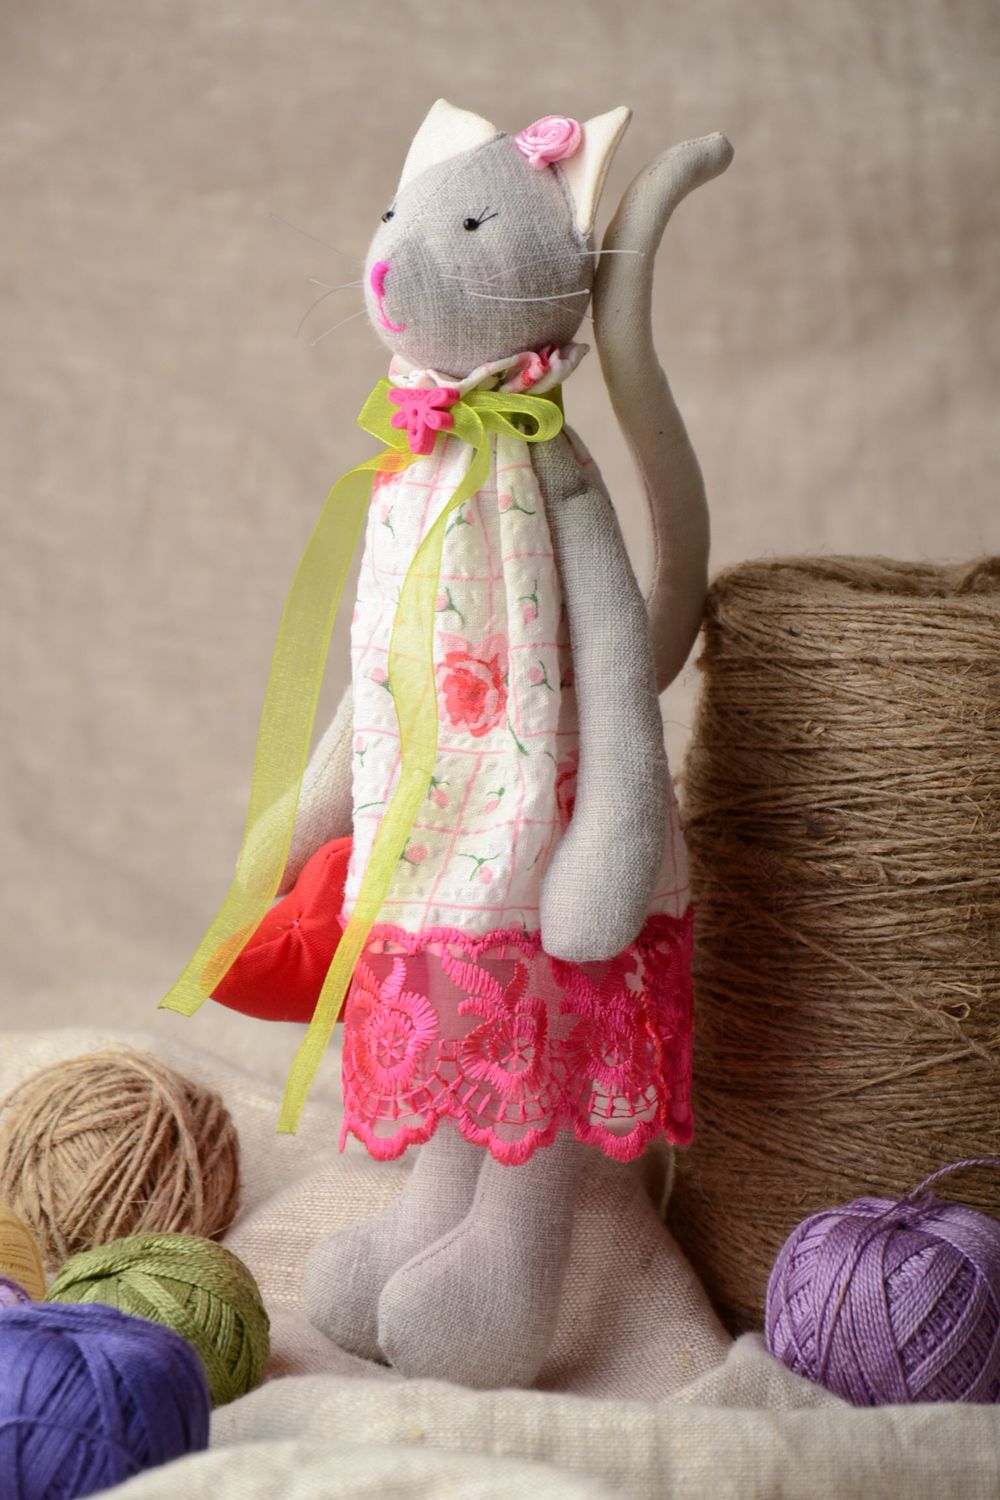 Fabric toy kitty in dress photo 1